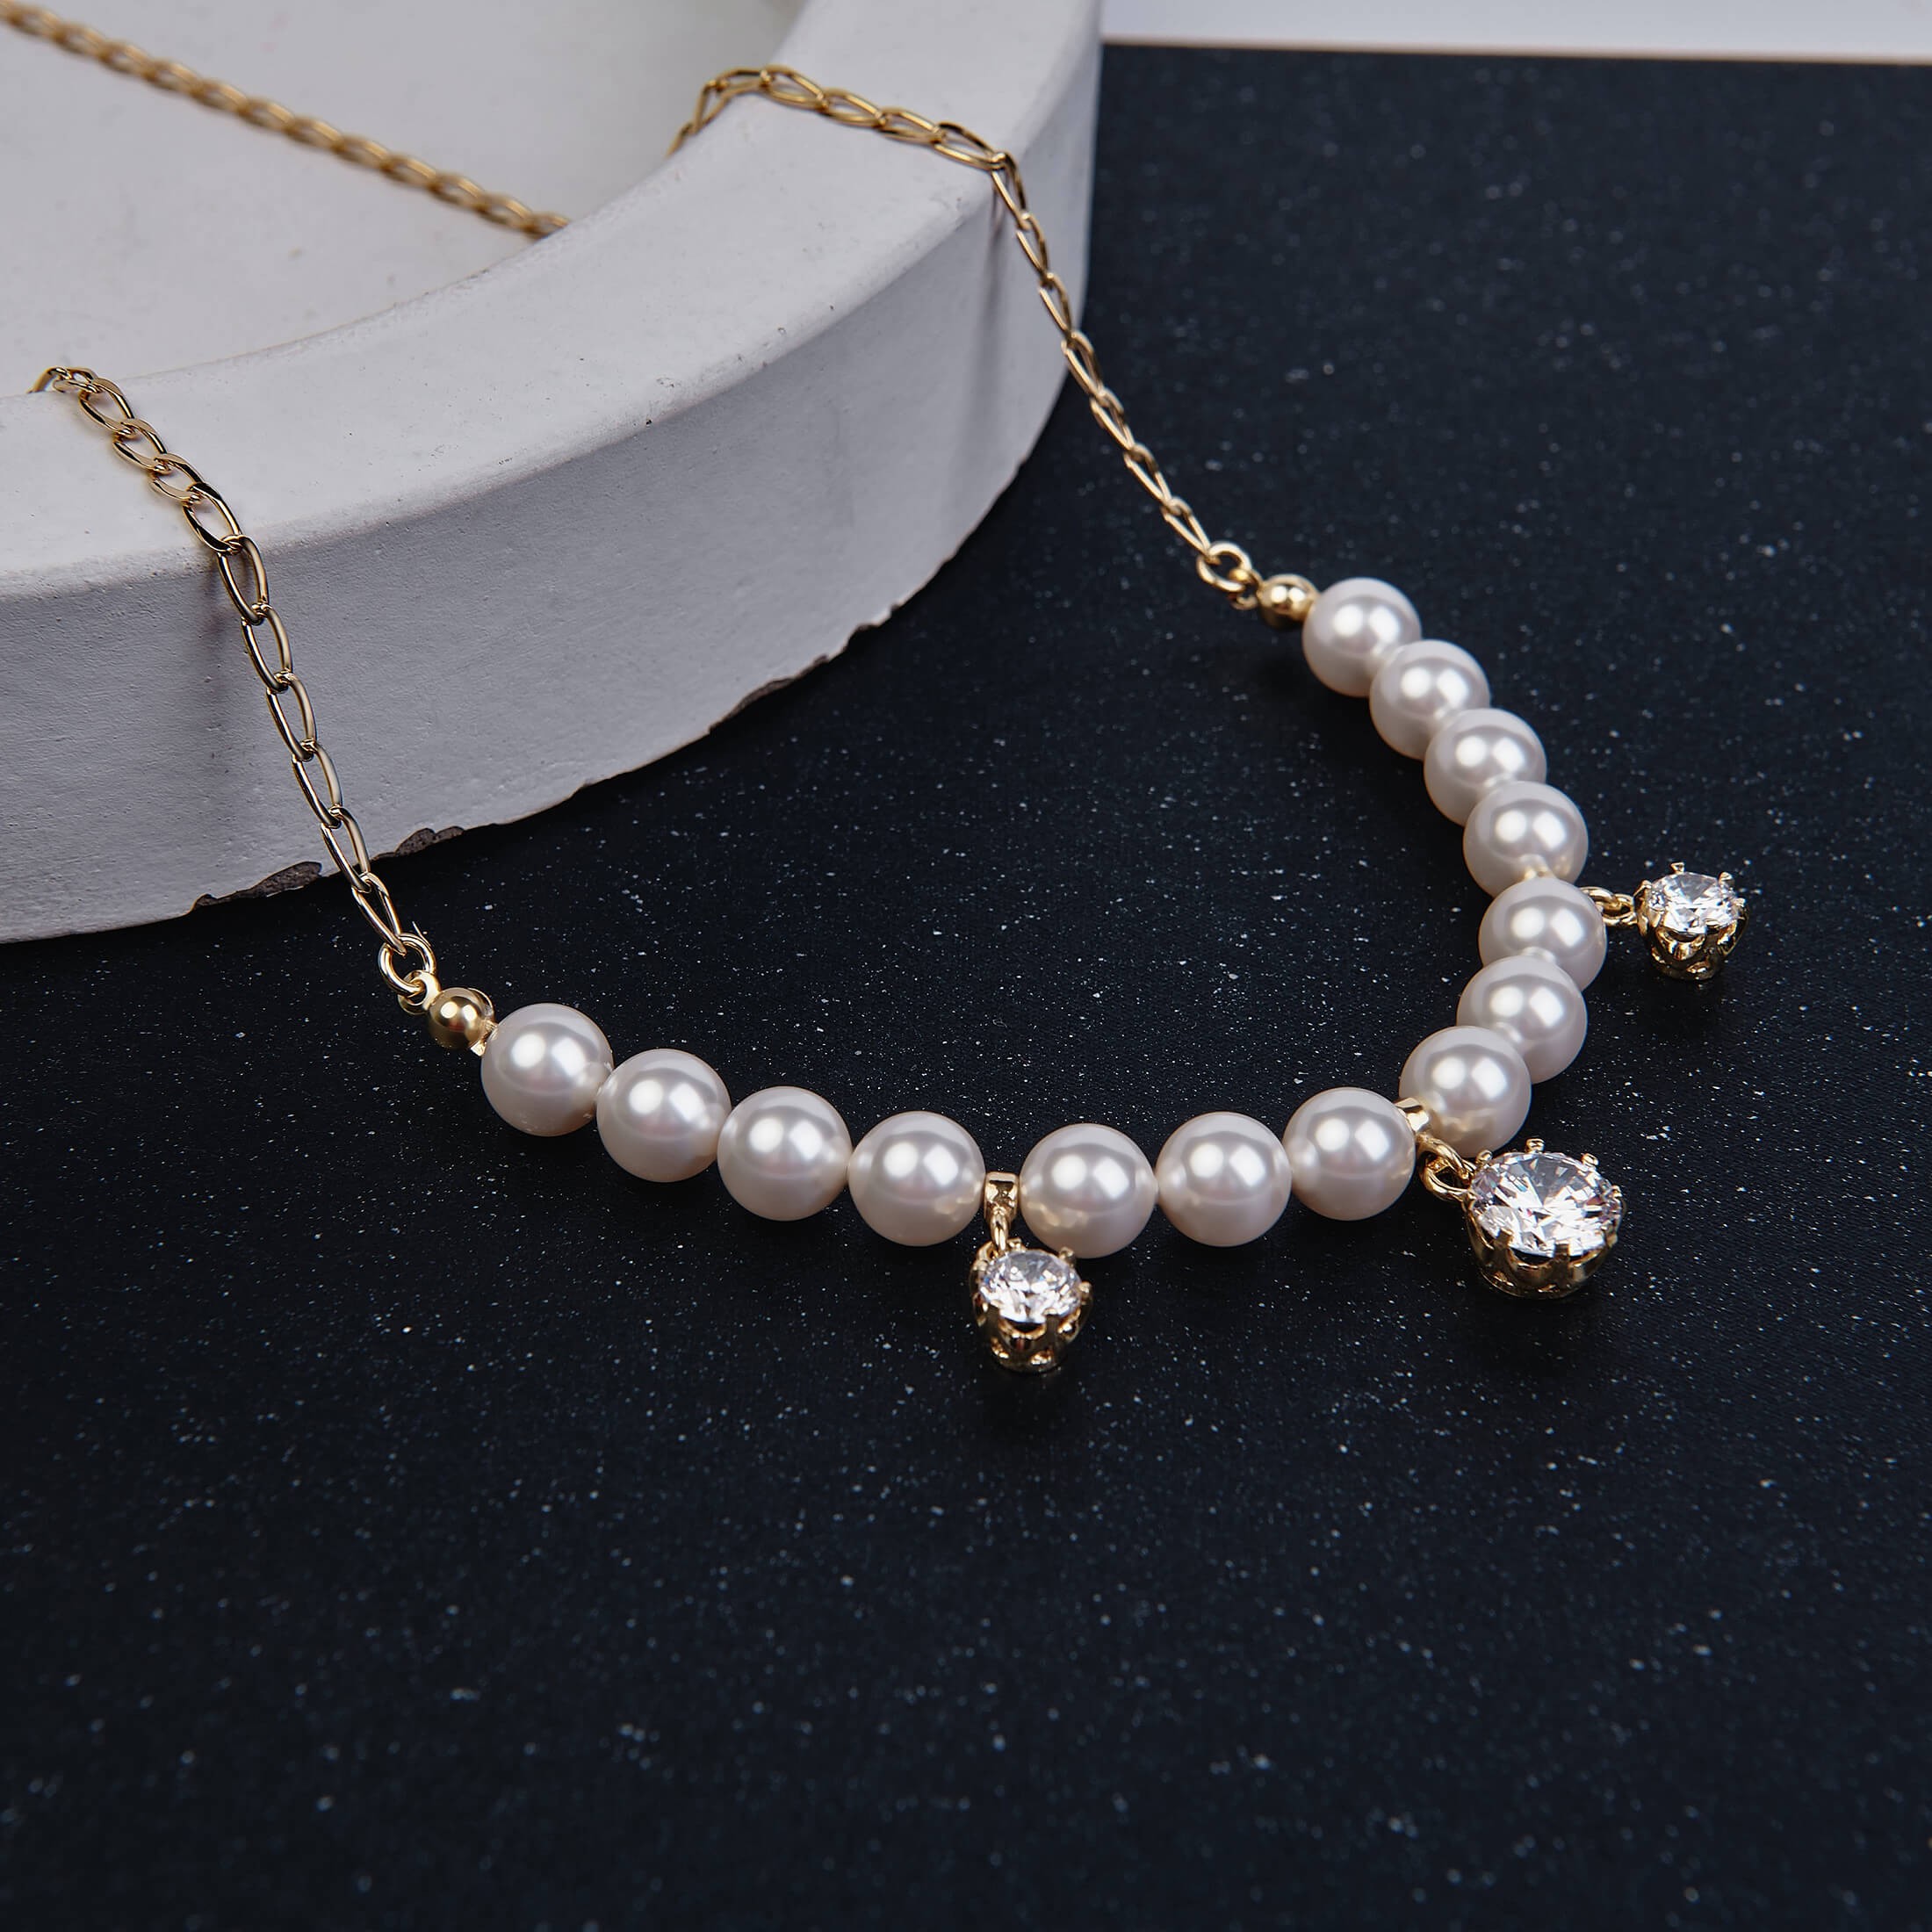 Choker with pearls & zircons, Sky&Soul, sterling silver 925